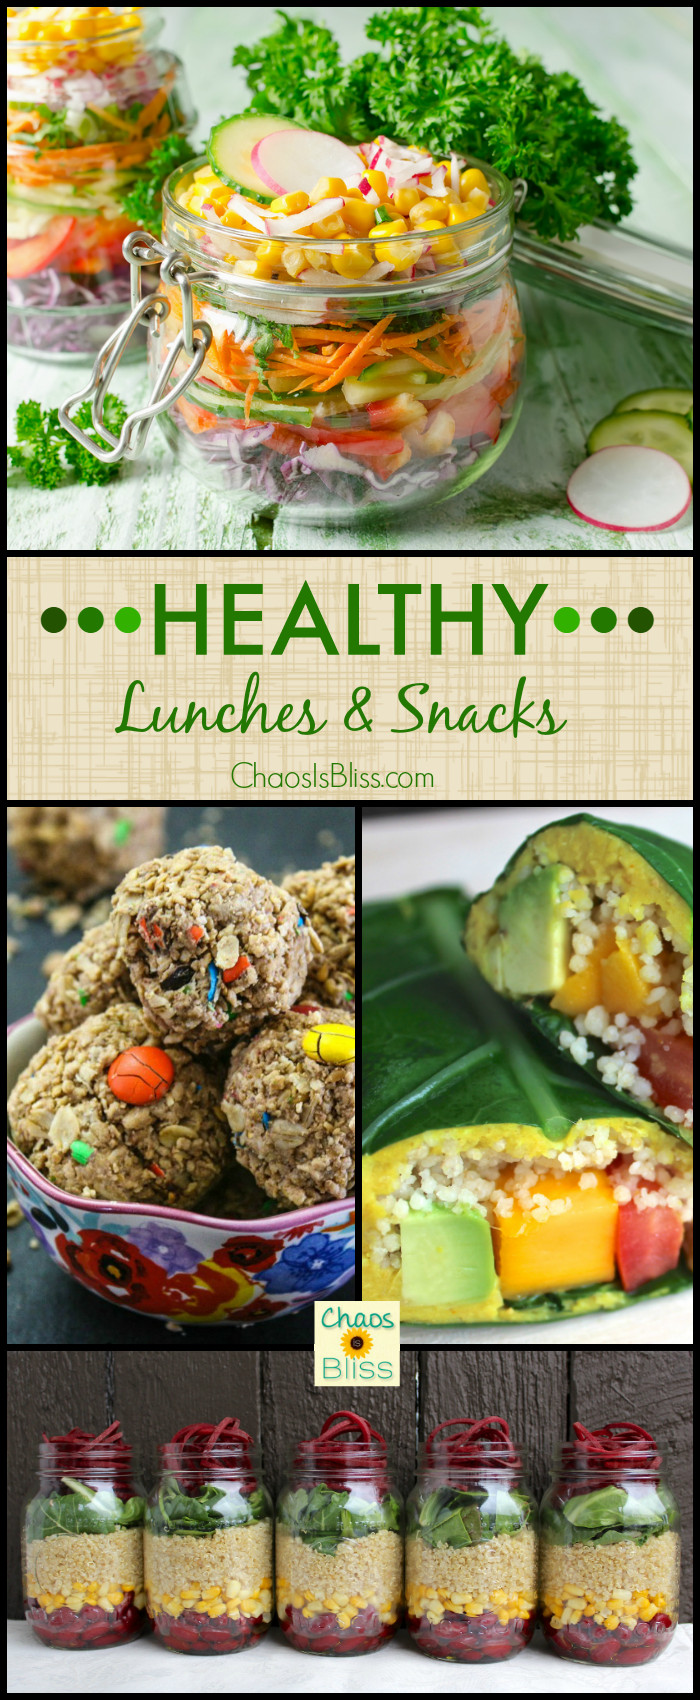 Healthy Low Calorie Lunches To Take To Work
 Healthy Lunches & Snacks when you Work from Home